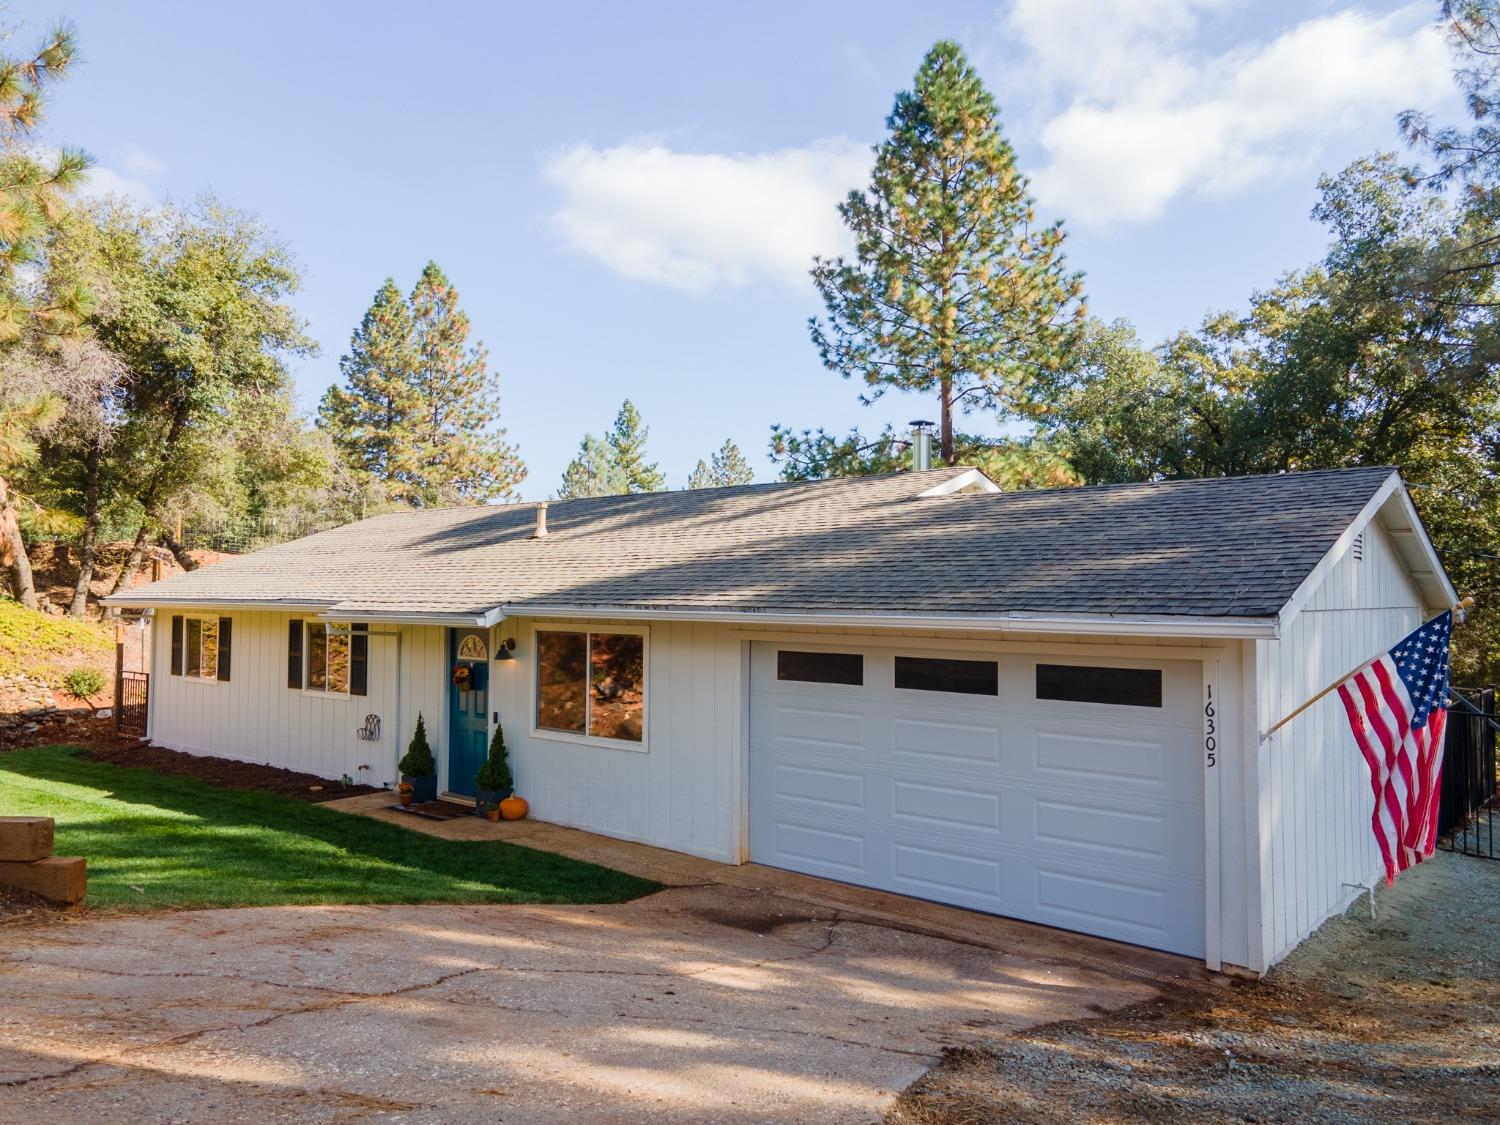 Photo of 16305 Alexandra Wy in Grass Valley, CA